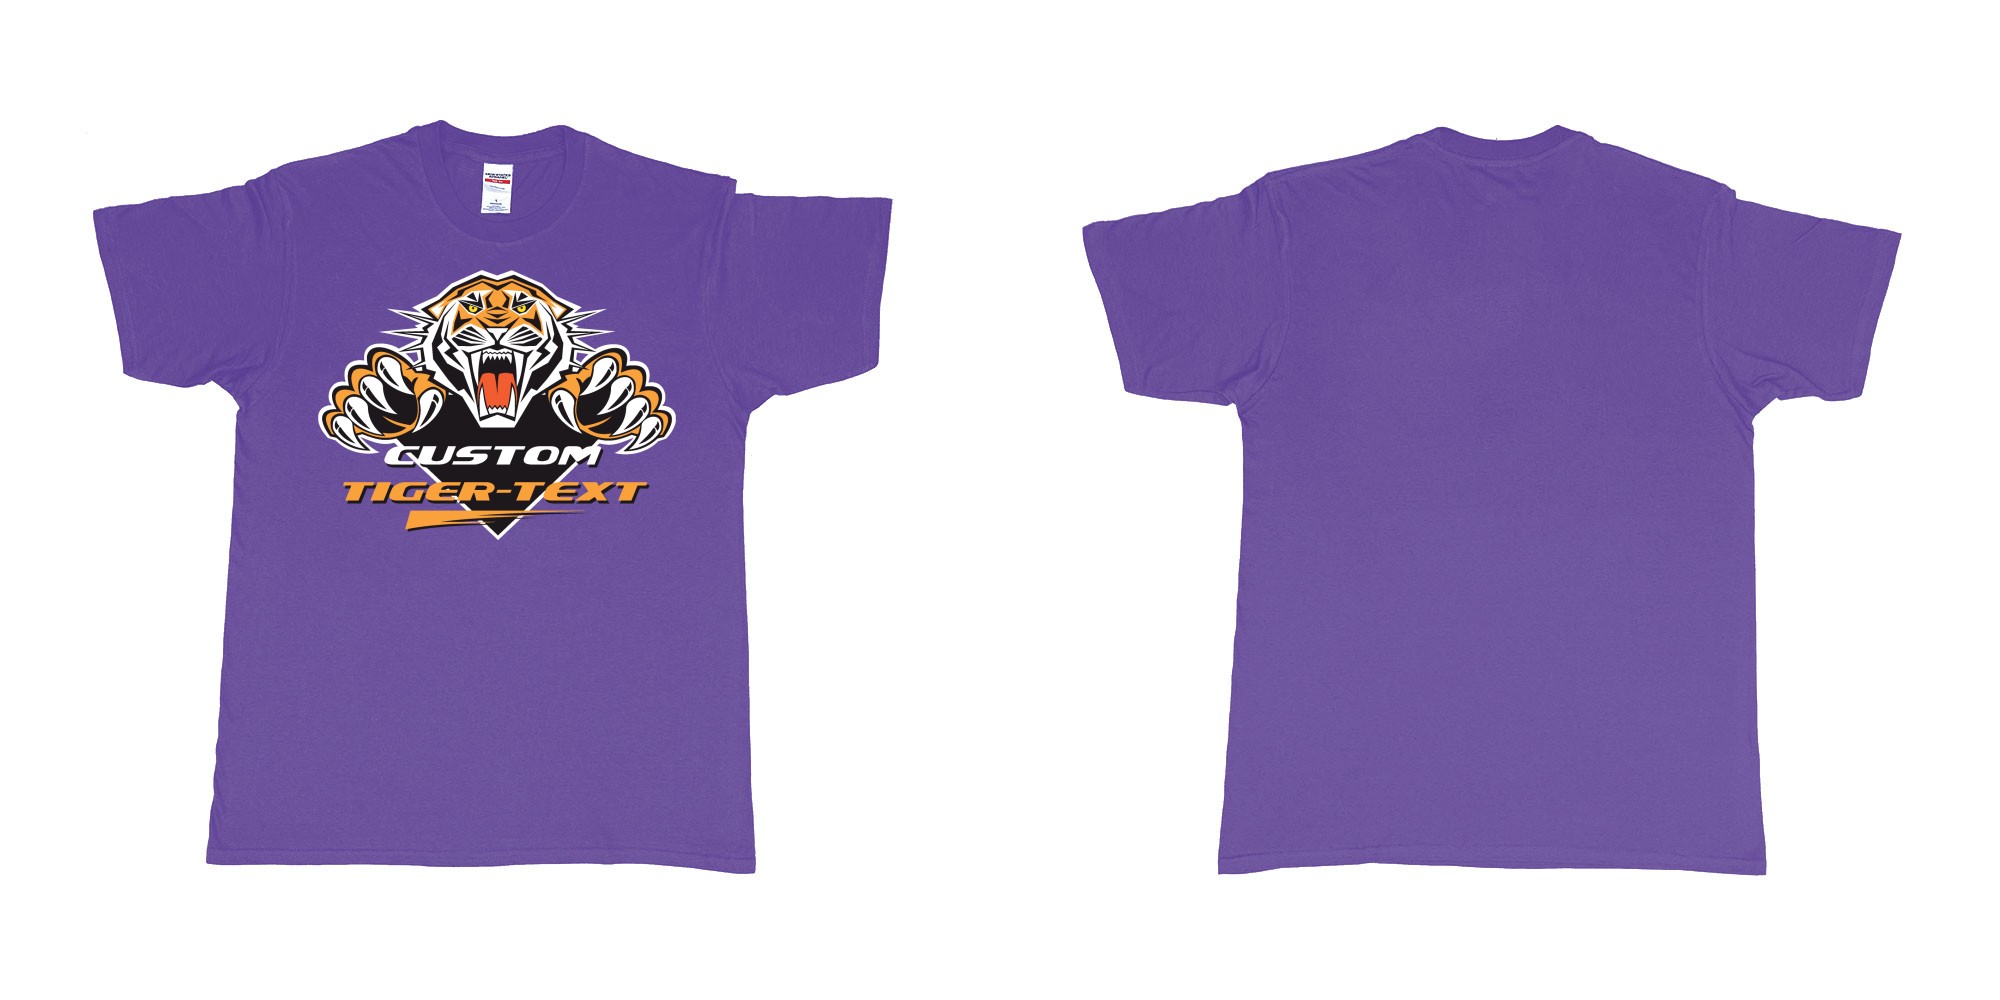 Custom tshirt design the wests tigers sydney national rugby league custom tshirt print in fabric color purple choice your own text made in Bali by The Pirate Way